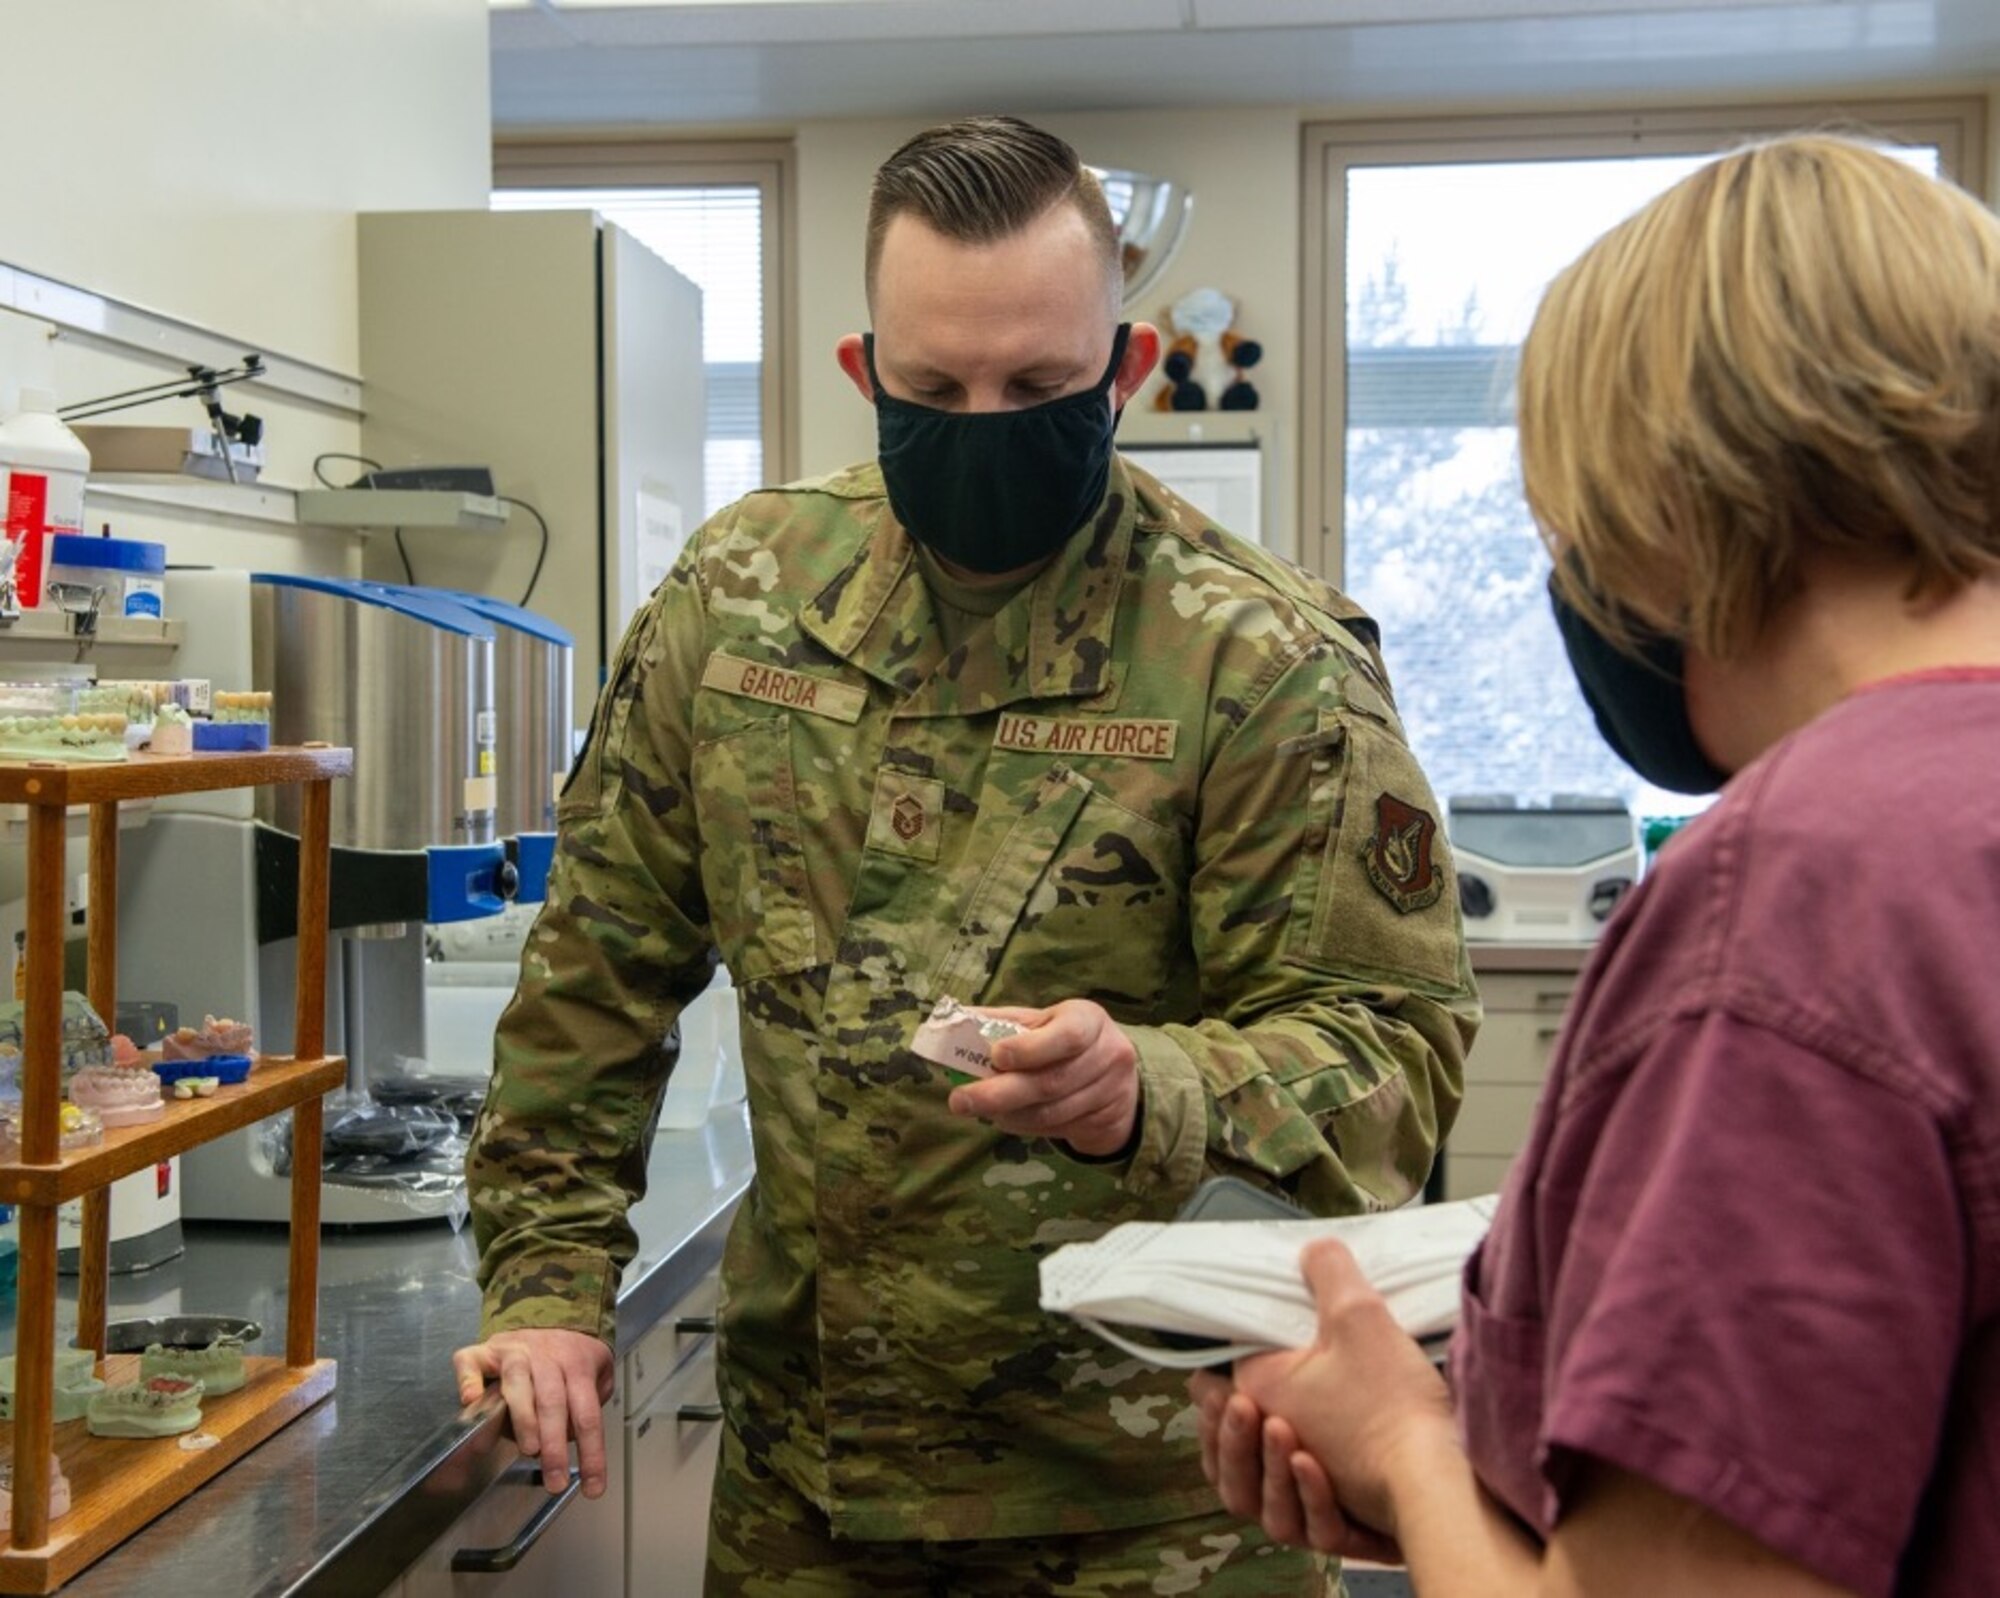 U.S. Air Force Master Sgt. Matthew Garcia, left, a dental lab technician assigned to the 673d Dental Squadron, shows fabricated crowns to U.S. Air Force Col. Kirsten Aguilar, Joint Base Elmendorf-Richardson and 673d Air Base Wing commander, at JBER, Alaska, March 2, 2021.